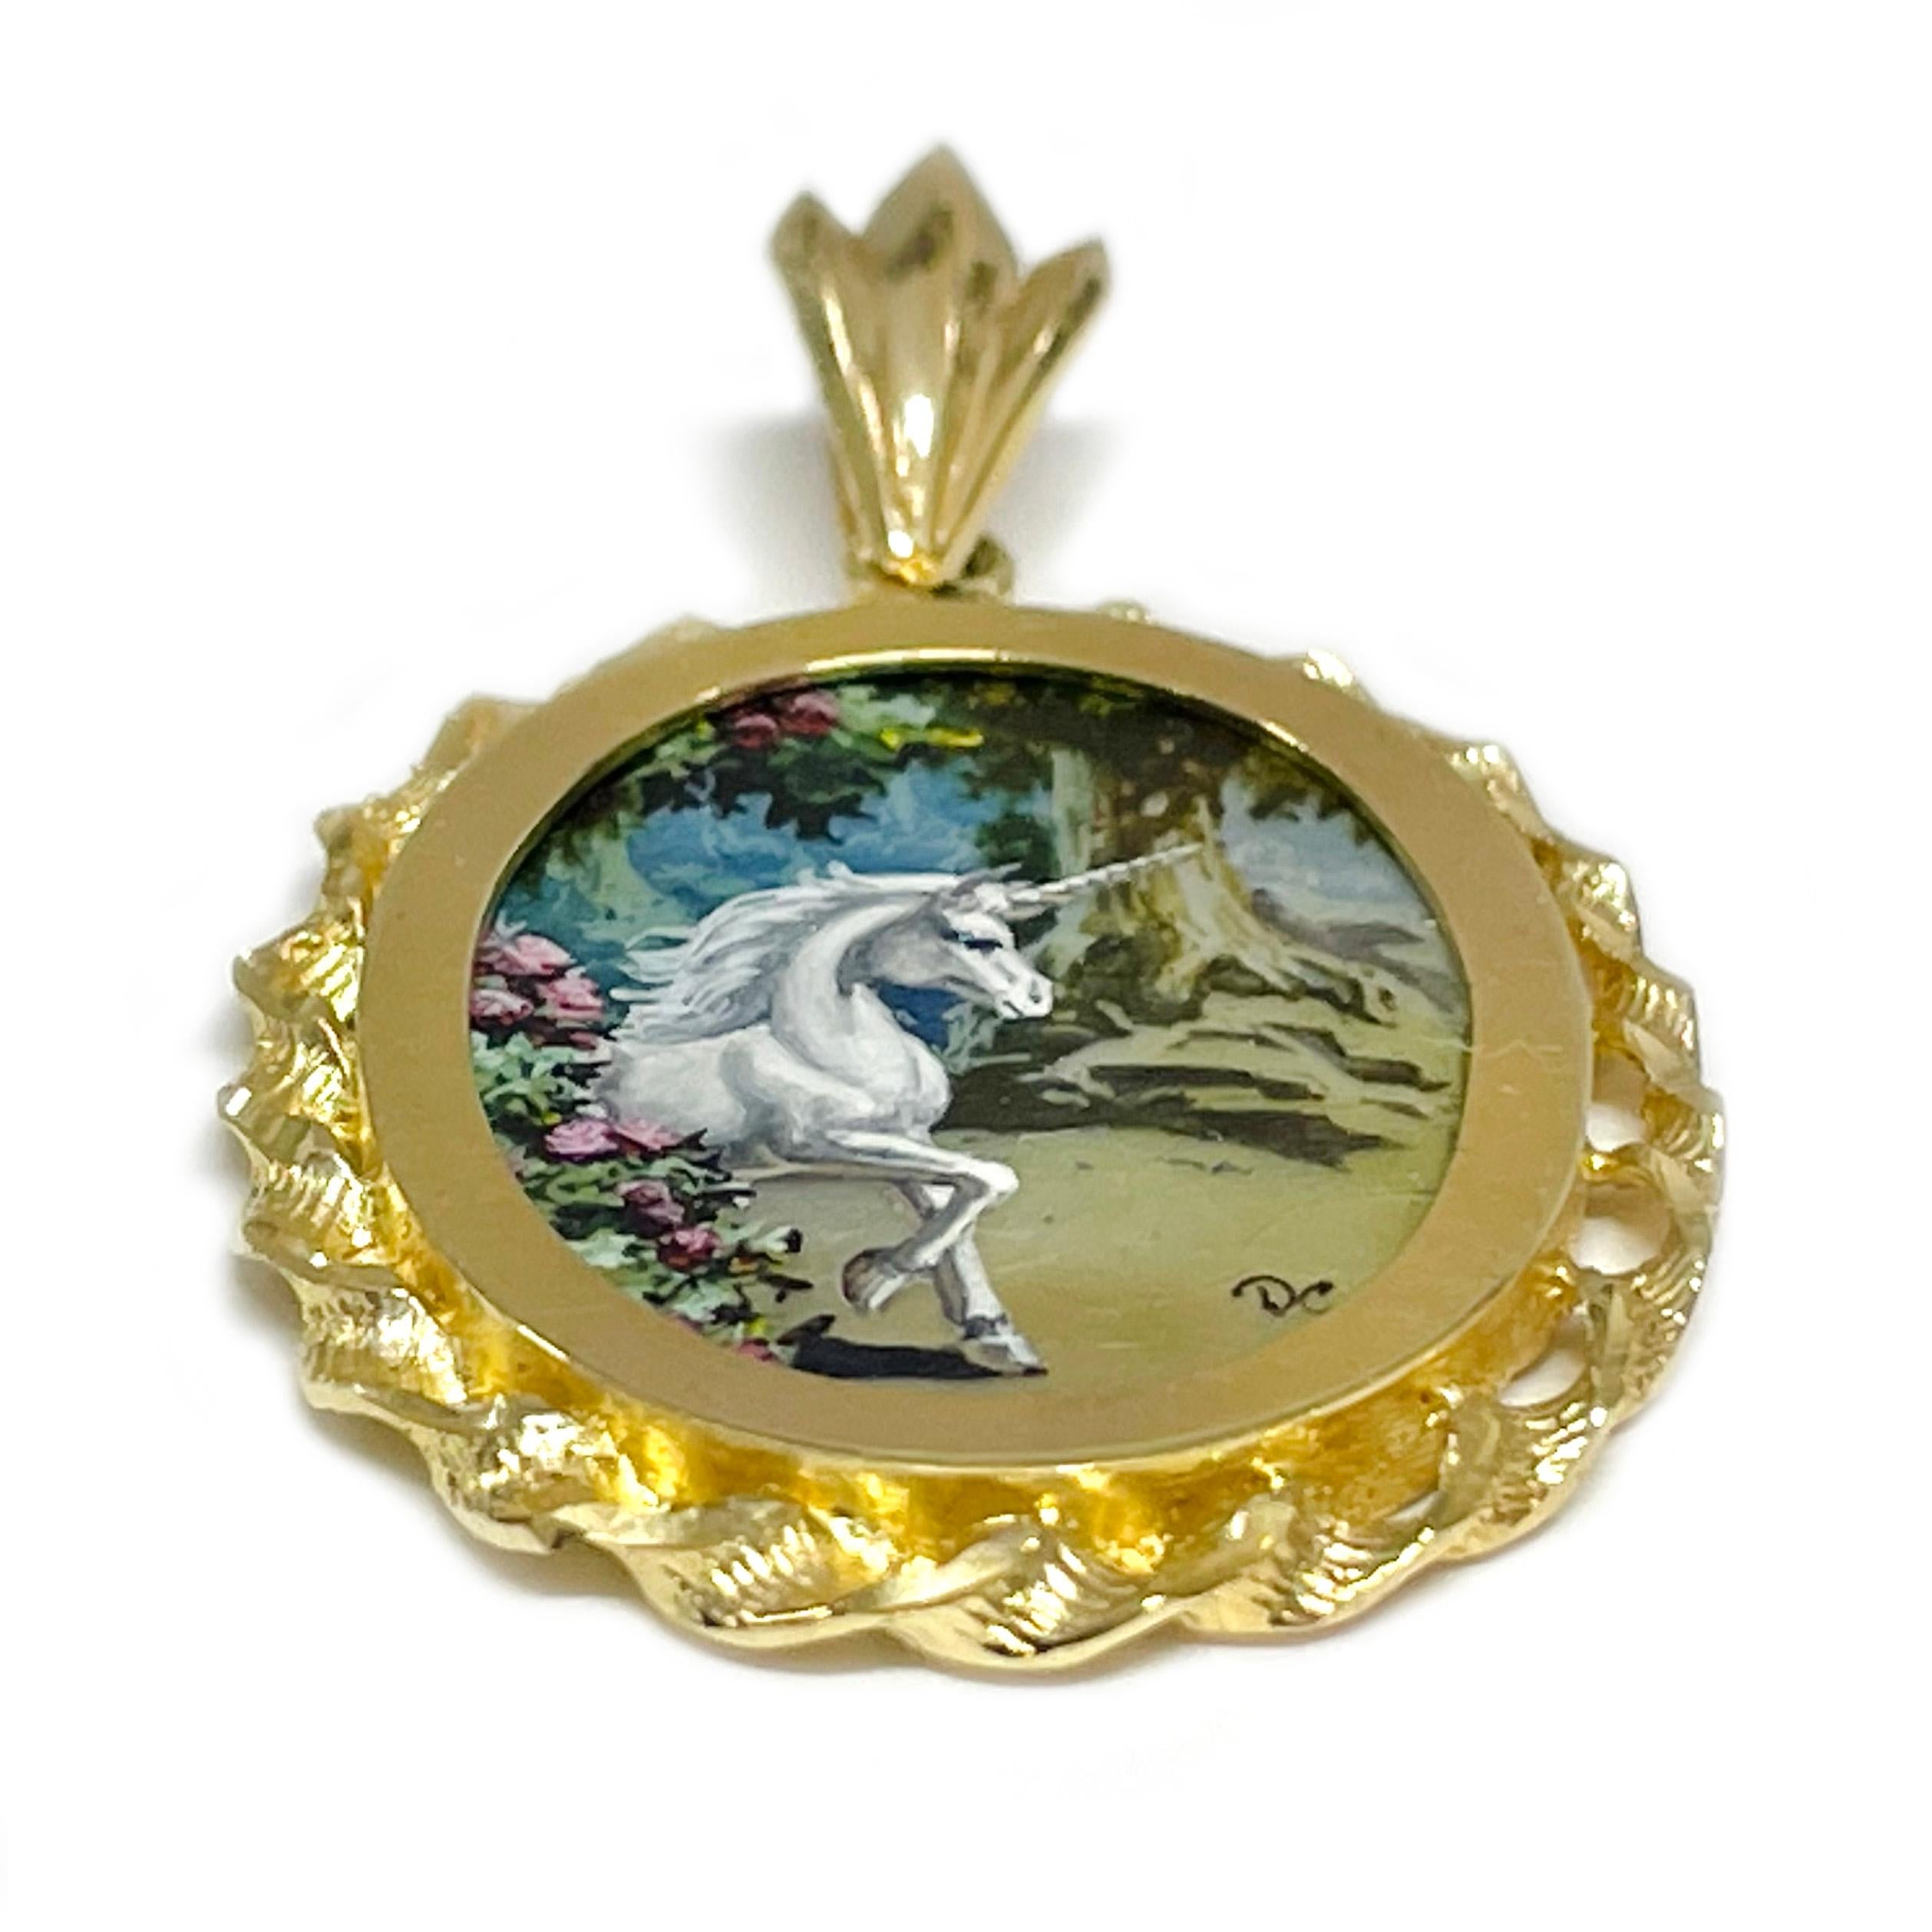 14 Karat Yellow Gold Forest Unicorn Hand Painted on a Mother of Pearl Pendant. The miniature painting is set in a 14 karat gold twisted rope oval frame with diamond-cut details. The painting is signed by the master artist, DC Darryl C. and includes